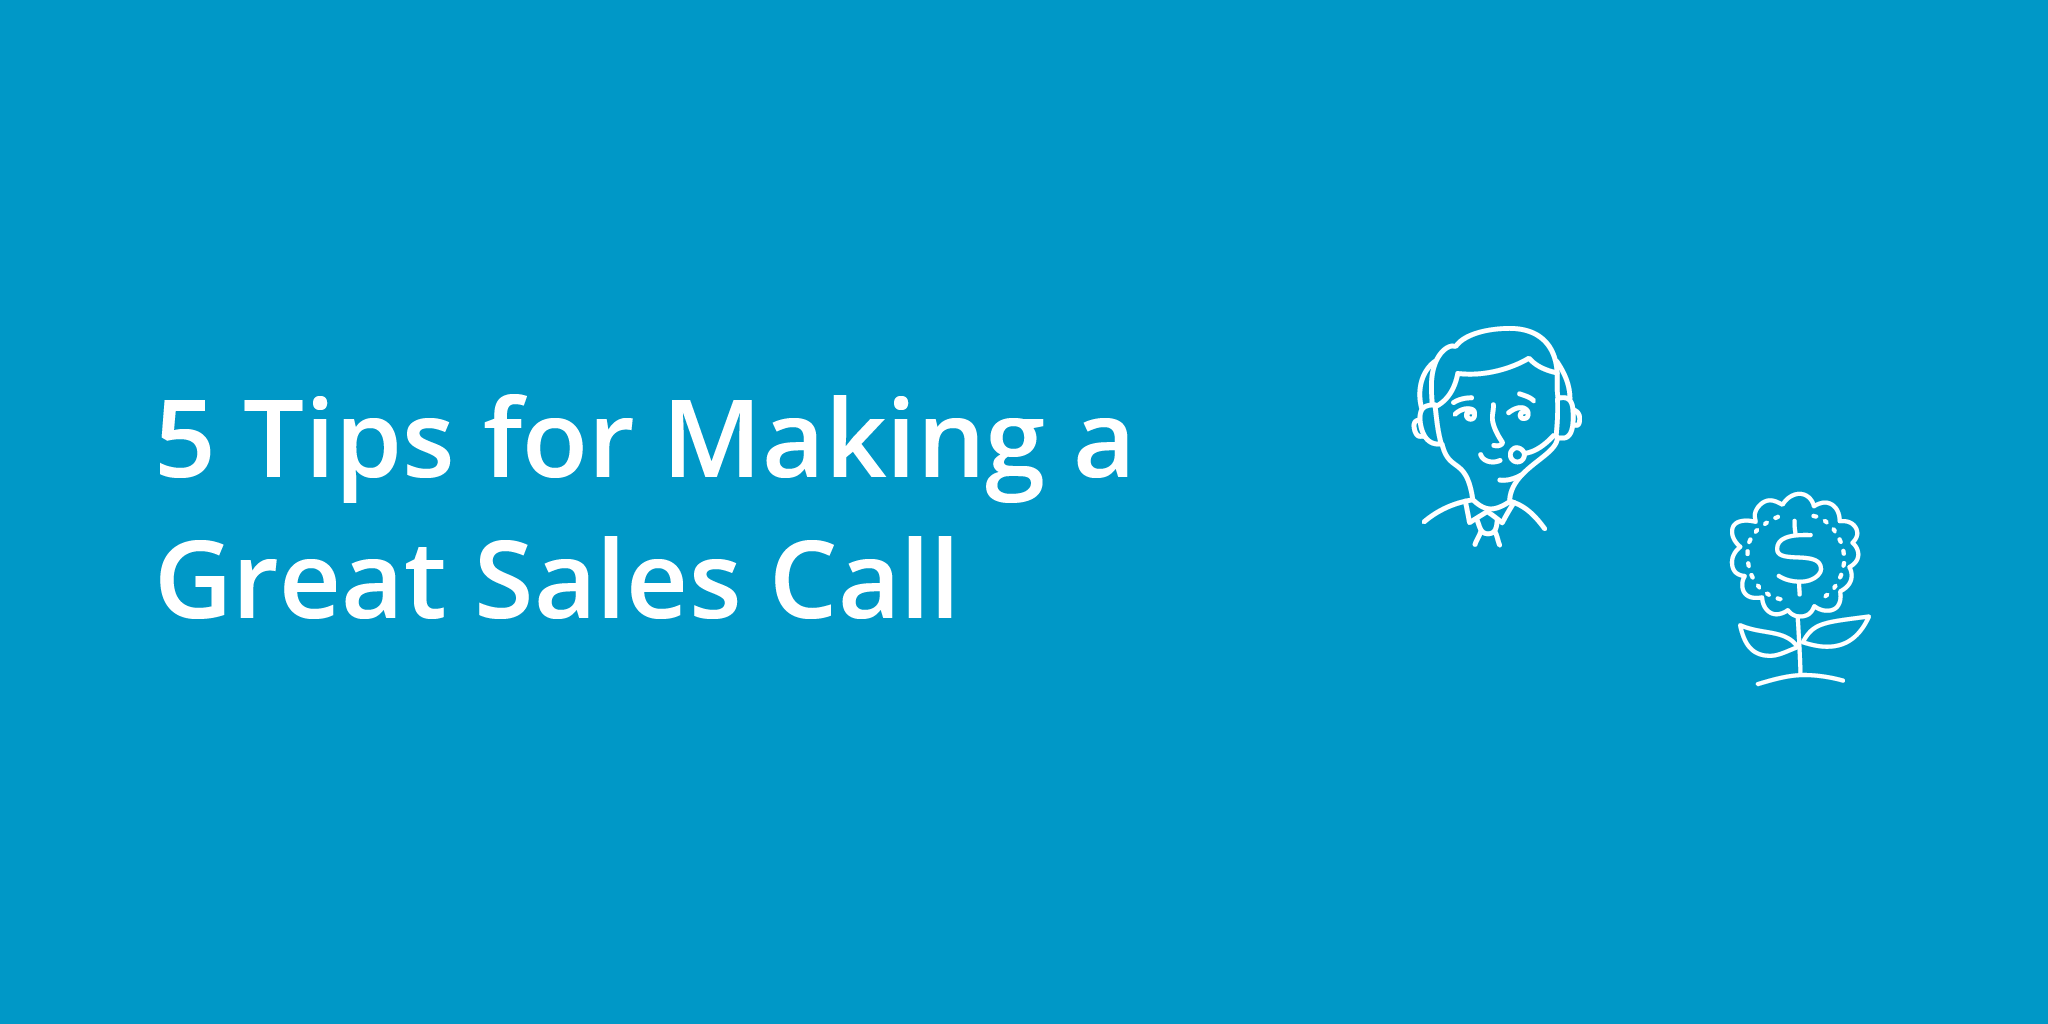 5 Tips for Making a Great Sales Call | Telephones for business